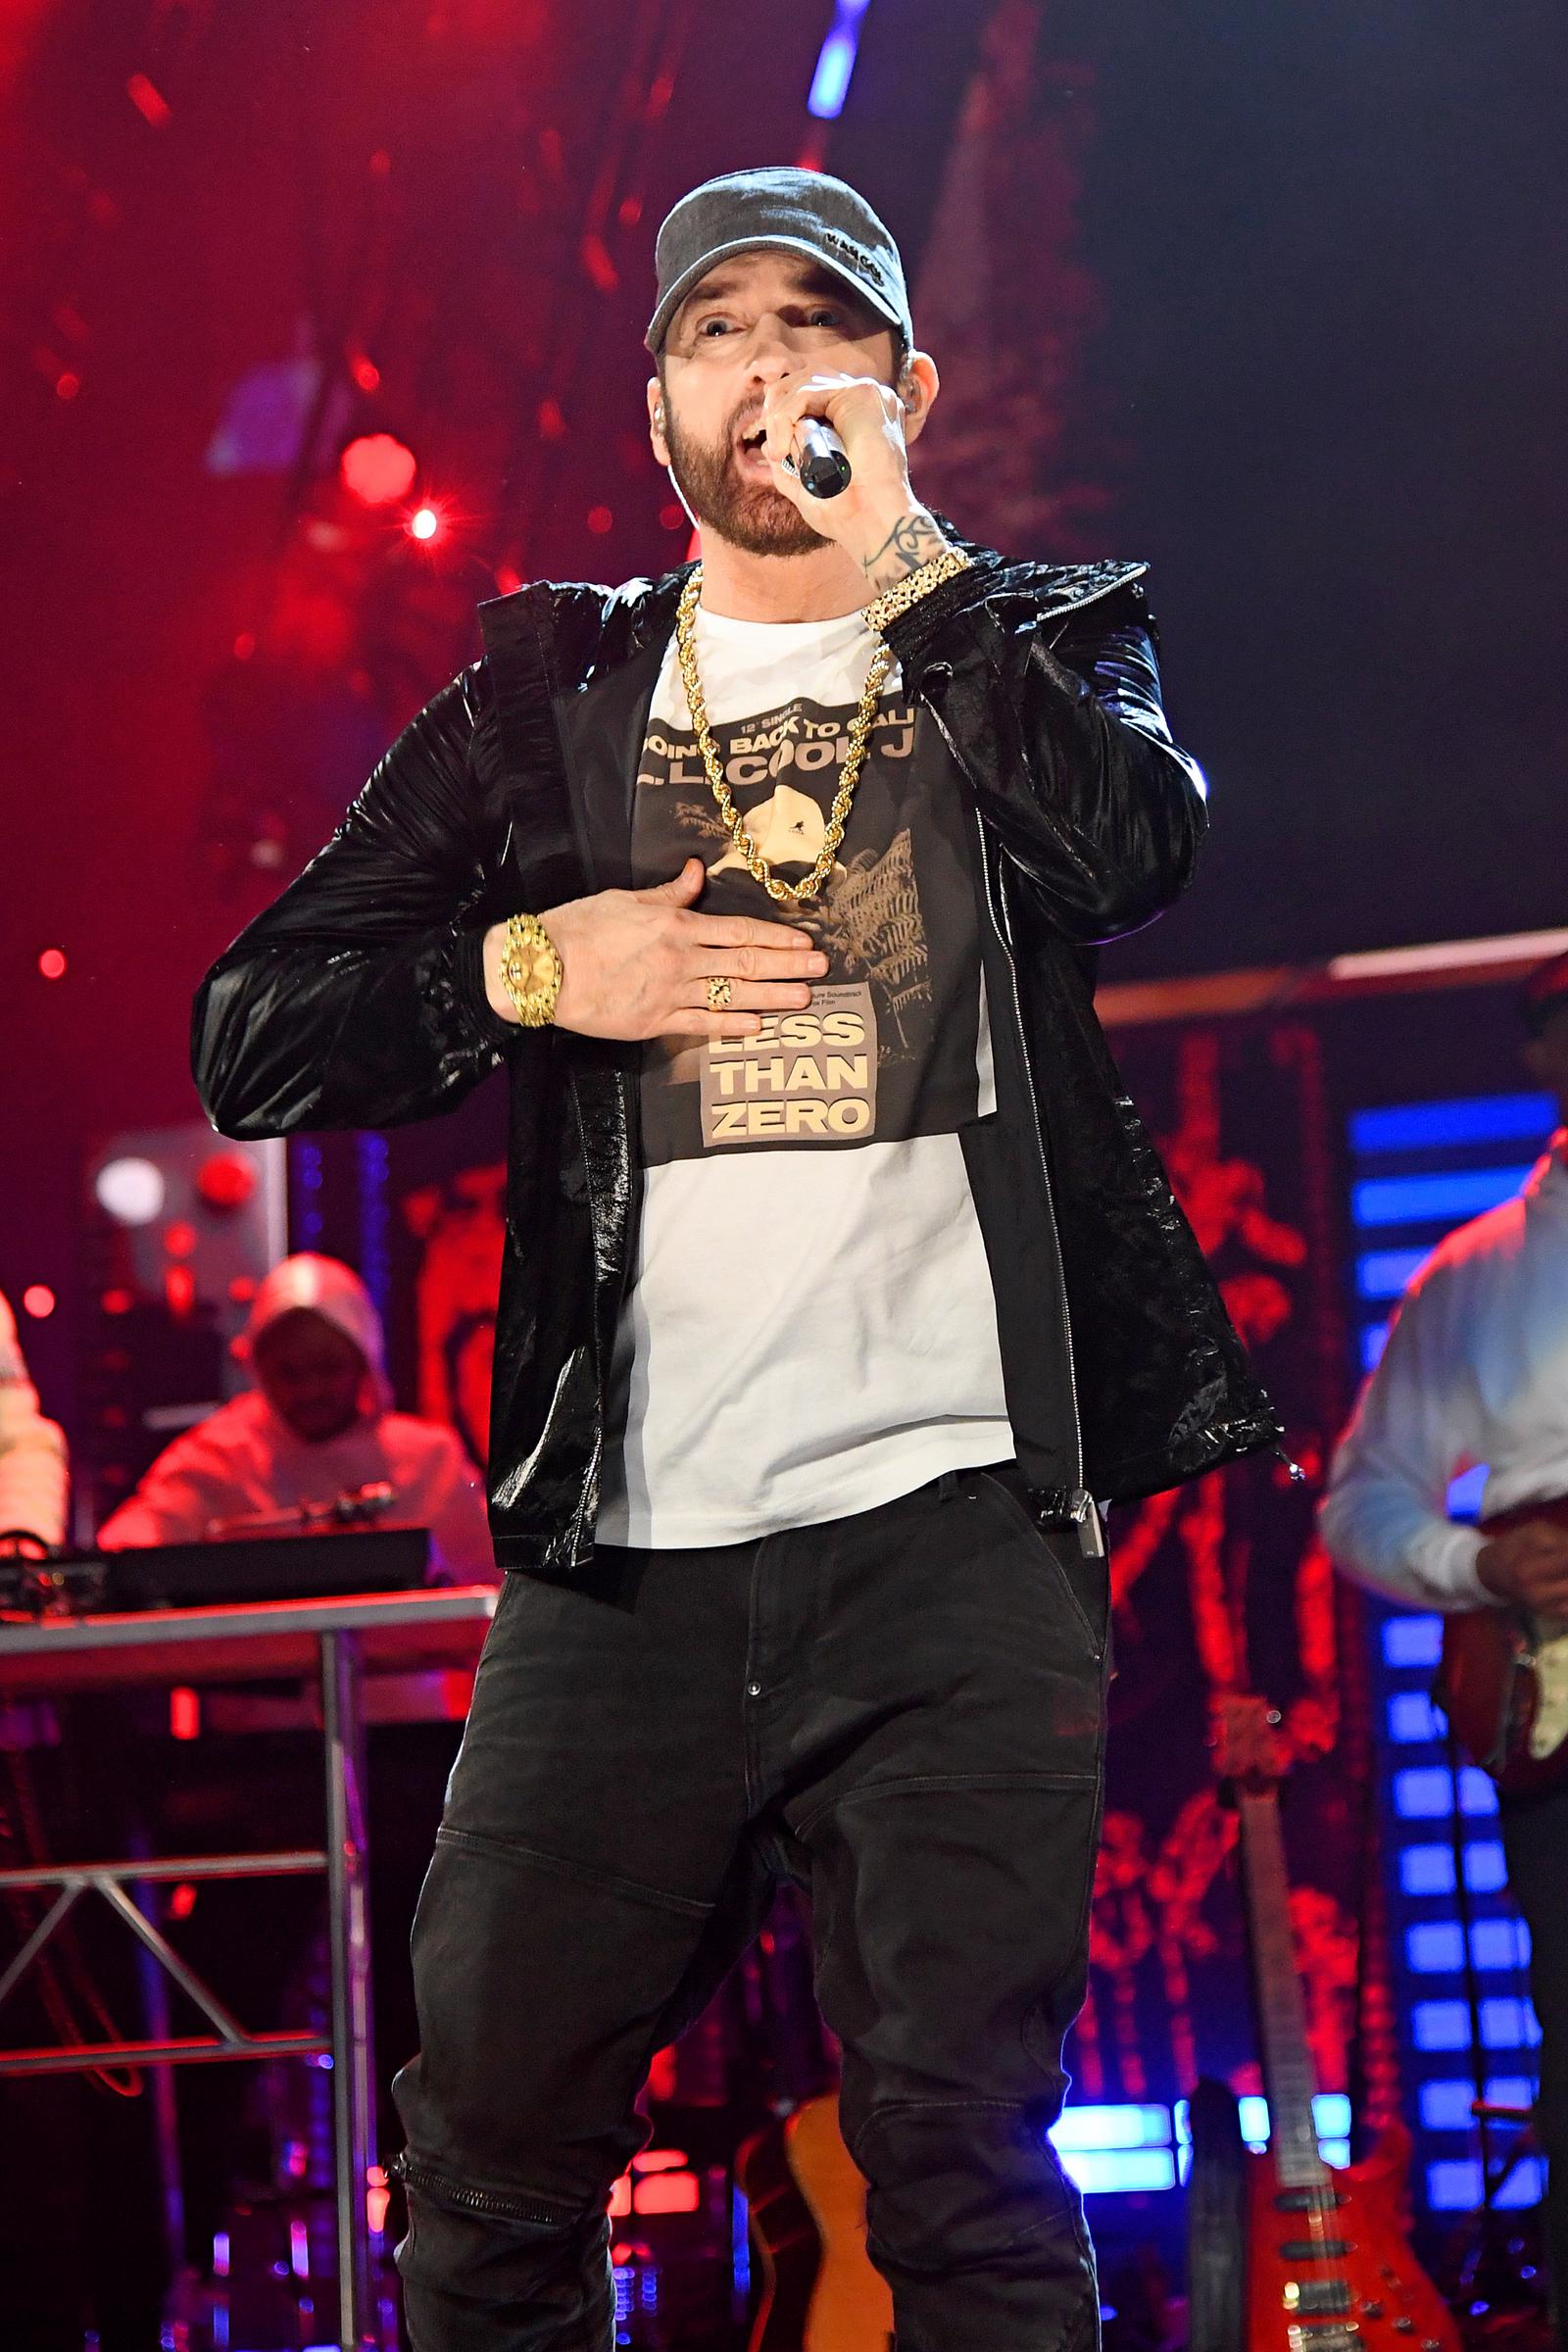 Eminem performing during the 36th Annual Rock & Roll Hall Of Fame Induction Ceremony in Cleveland, Ohio on October 30, 2021 | Source: Getty Images